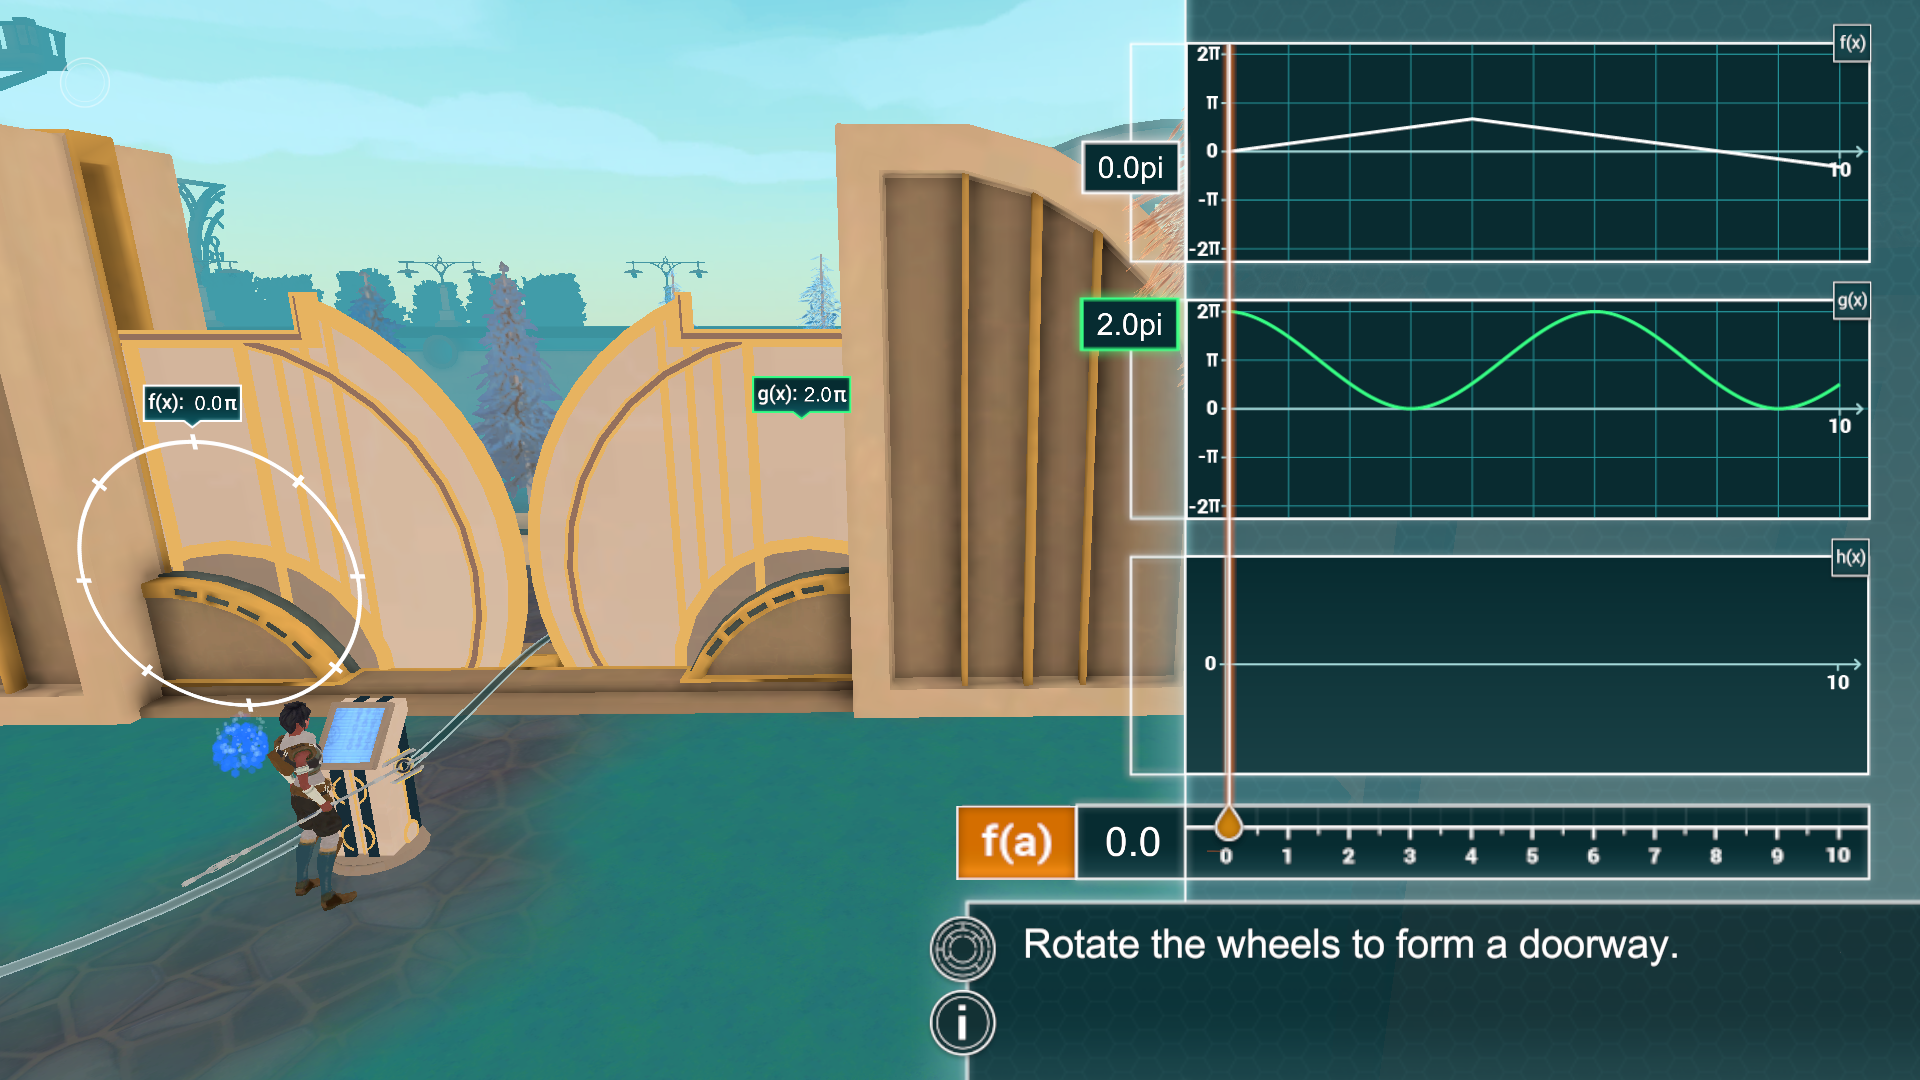 I Learned Calculus With A Video Game, And It Was Surprisingly Fun